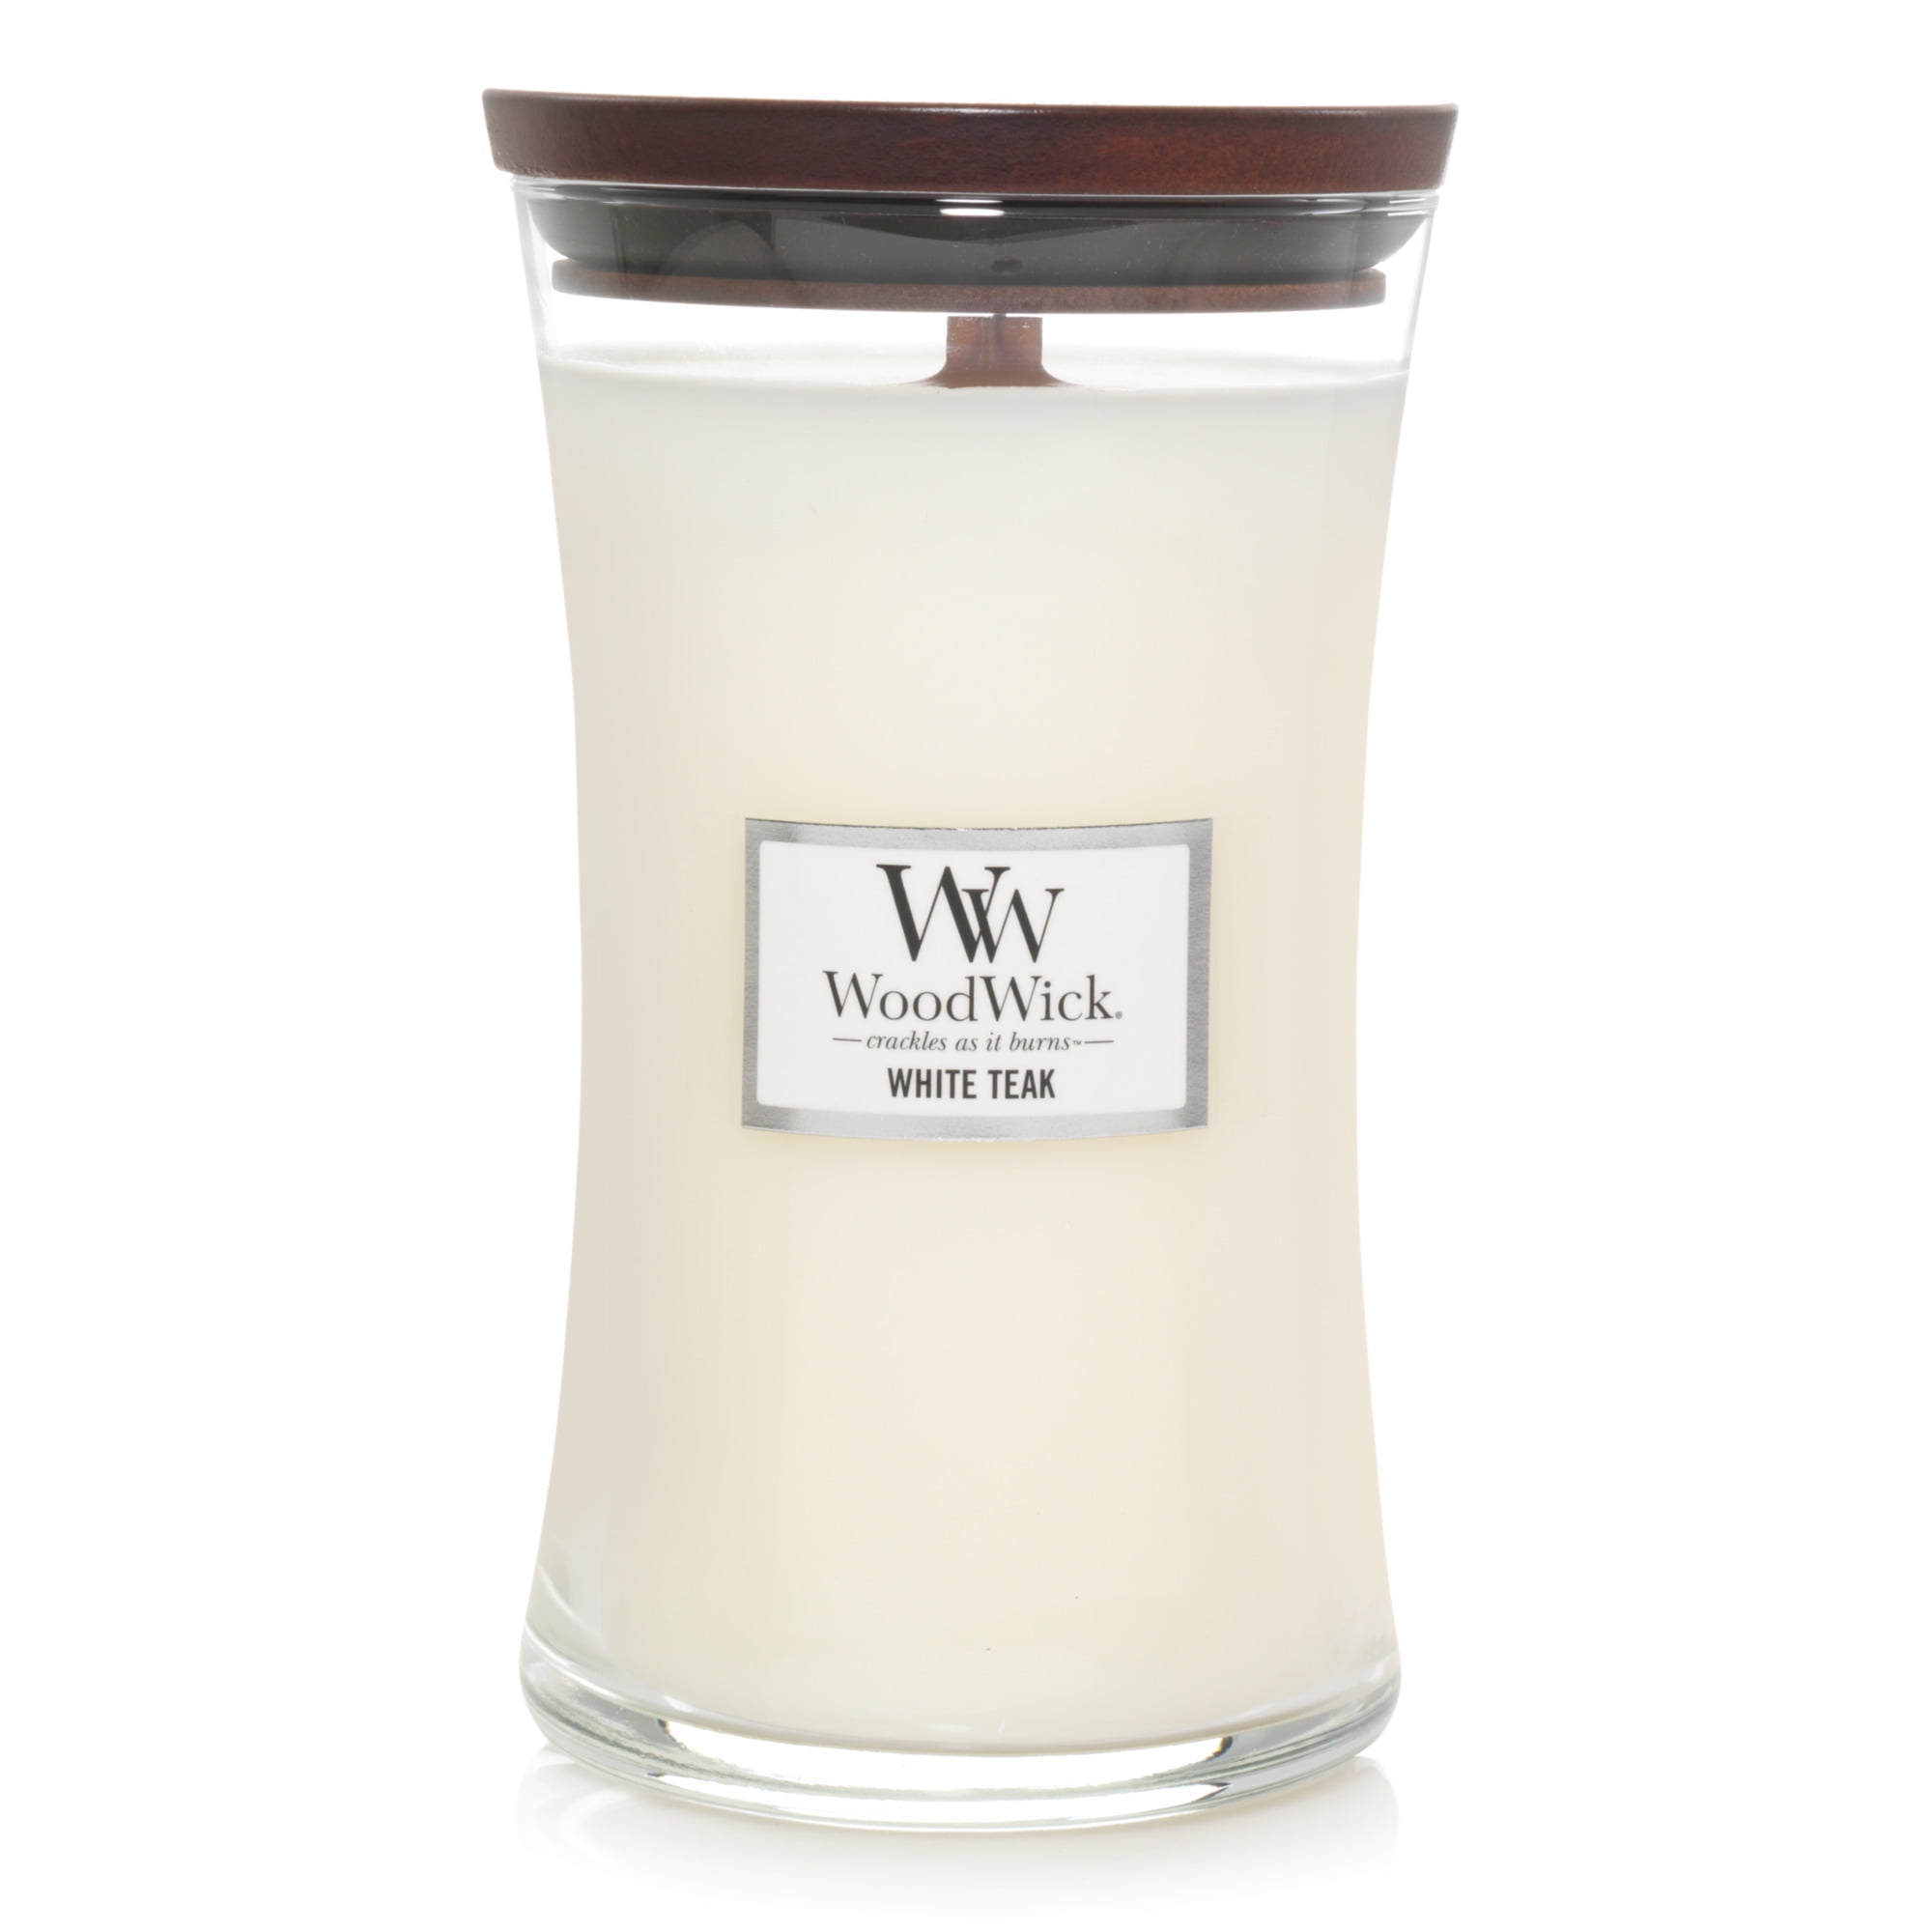 Linen WoodWick® Large Hourglass Candle - Large Hourglass Candles